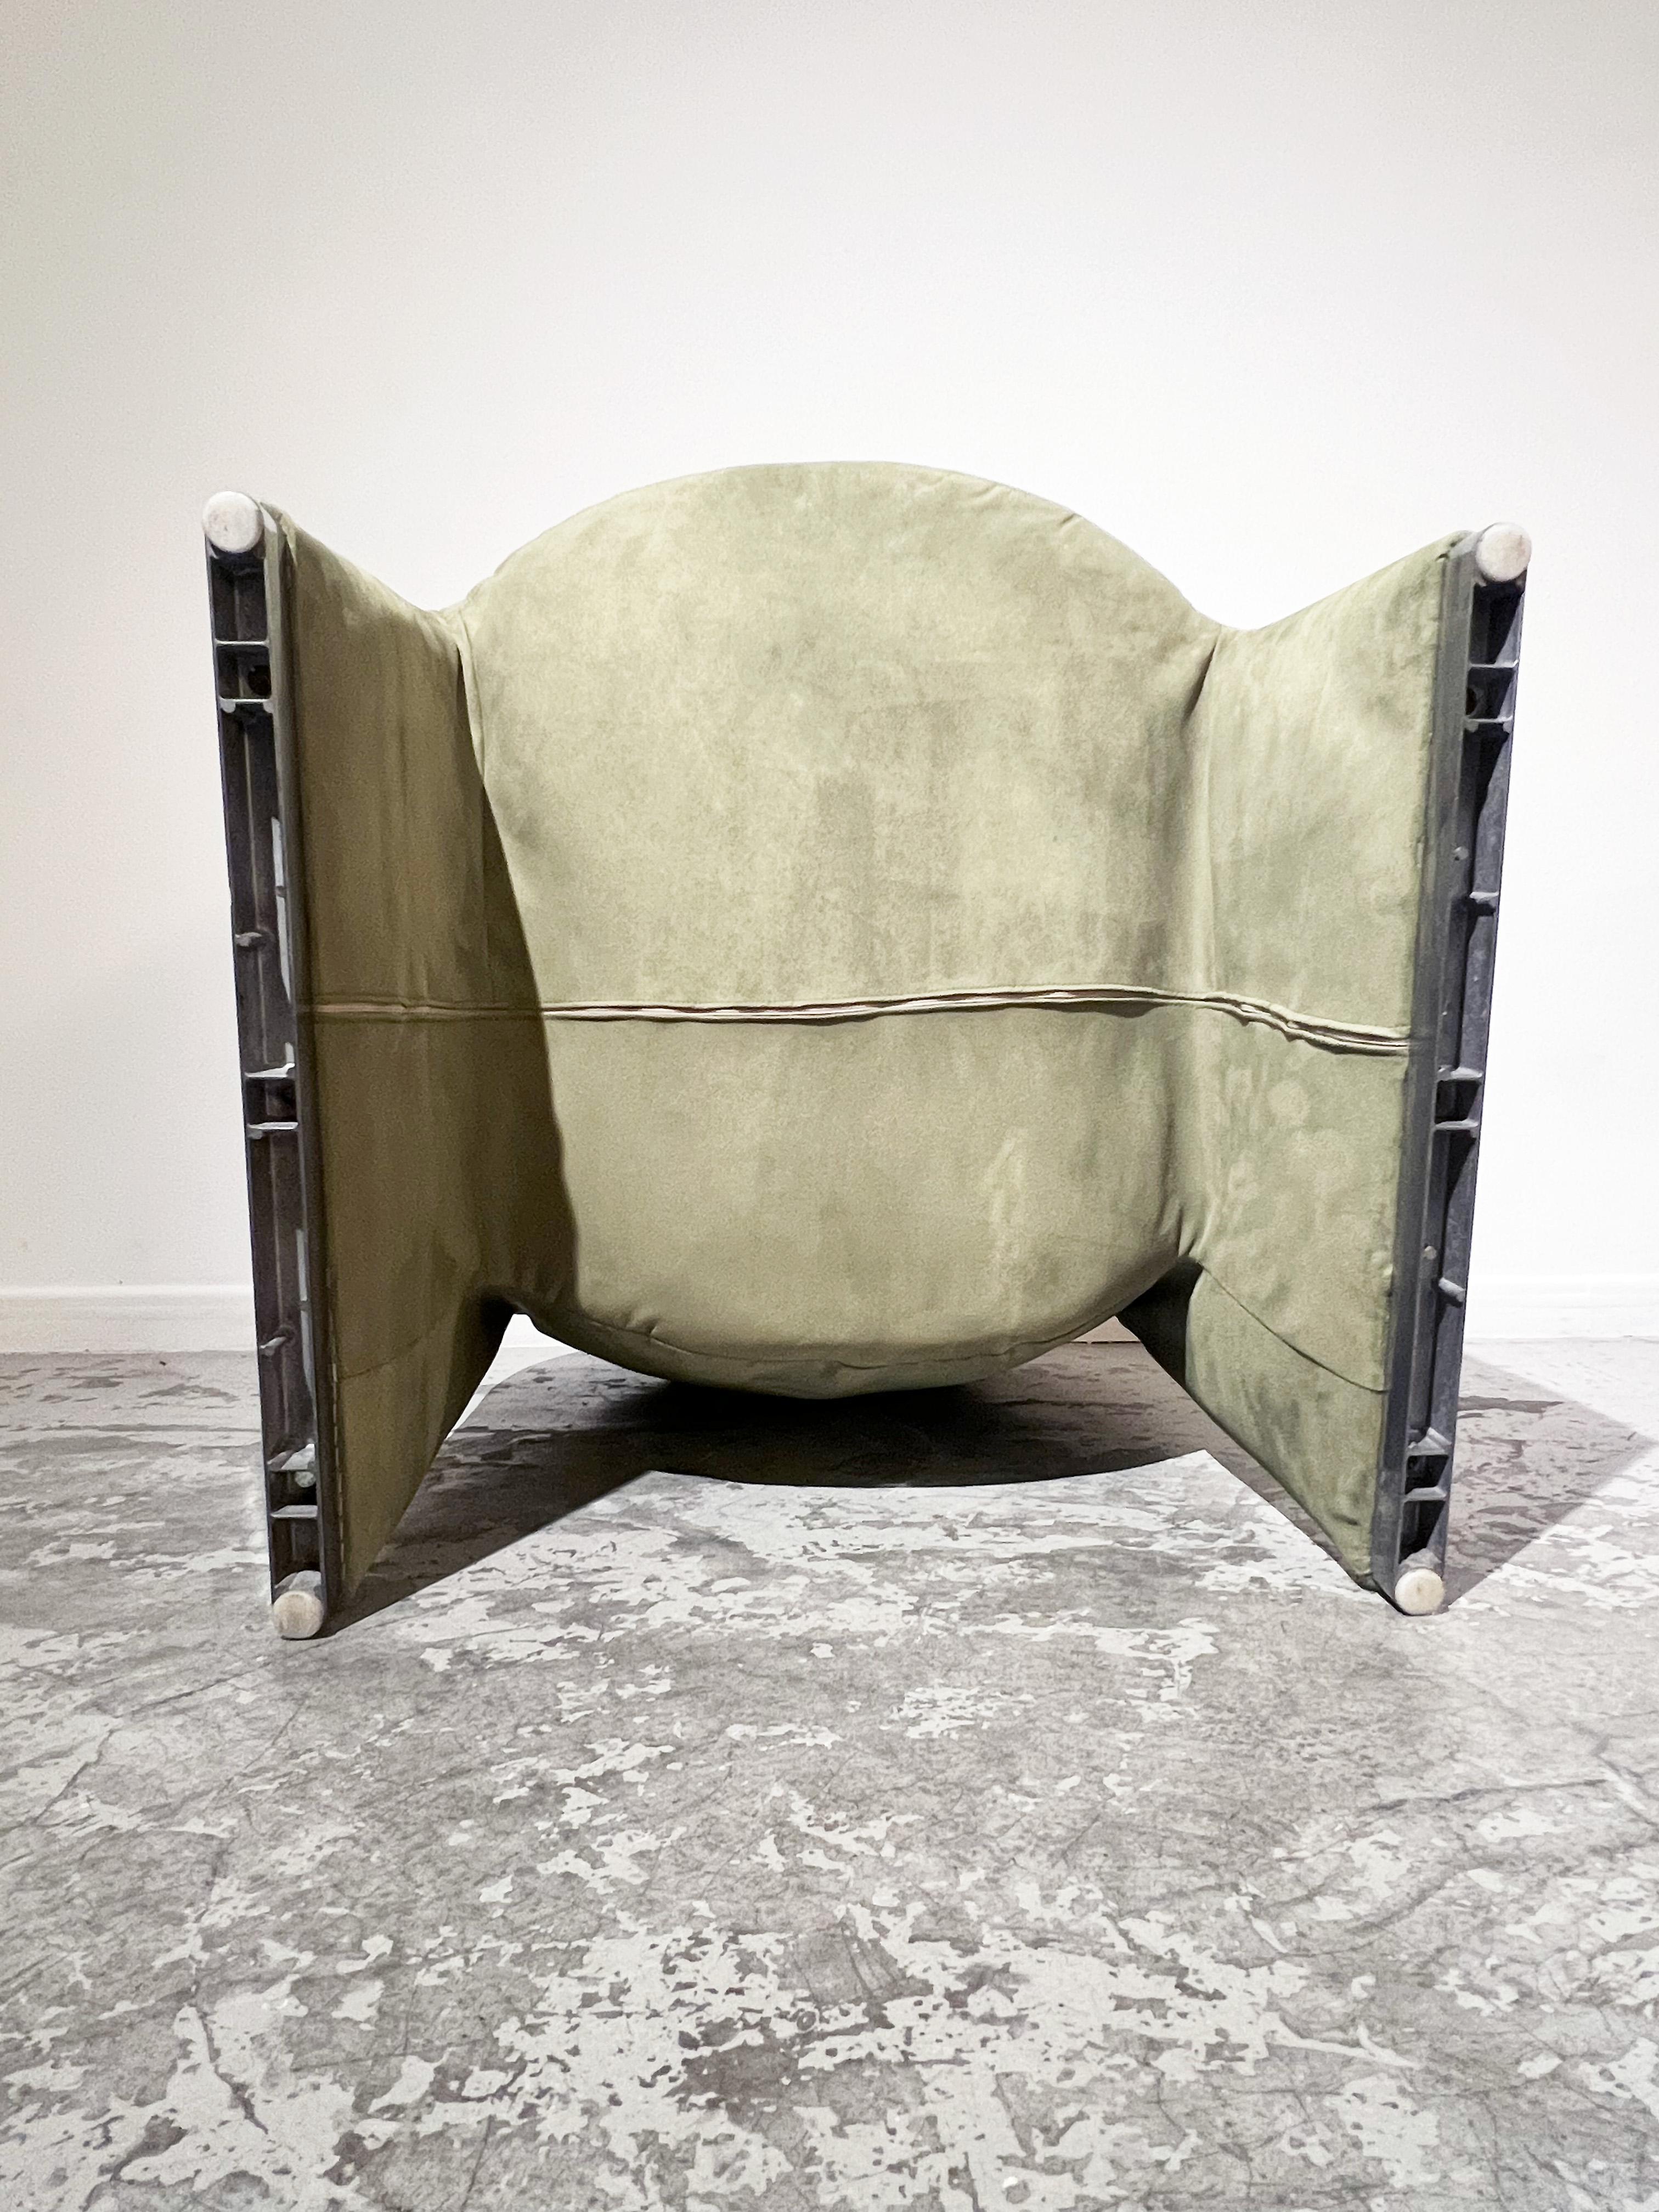 Giancarlo Piretti designed this Alky armchair for the renowned Castelli publishing house. This Italian designer studied at the Instituto Statale d'Arte before beginning his career with Anonima Castelli. For more than two decades, he has created a